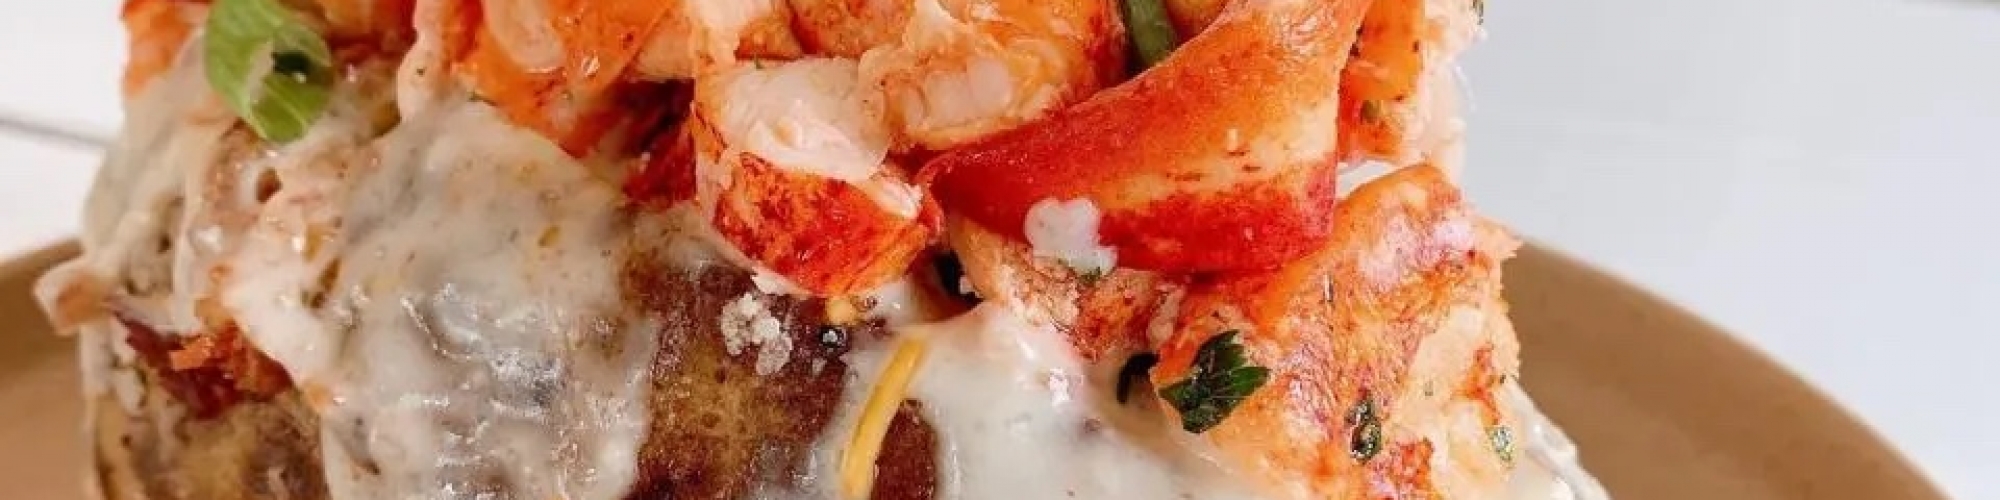 25 Delicious Dishes To Enjoy On National Lobster Day